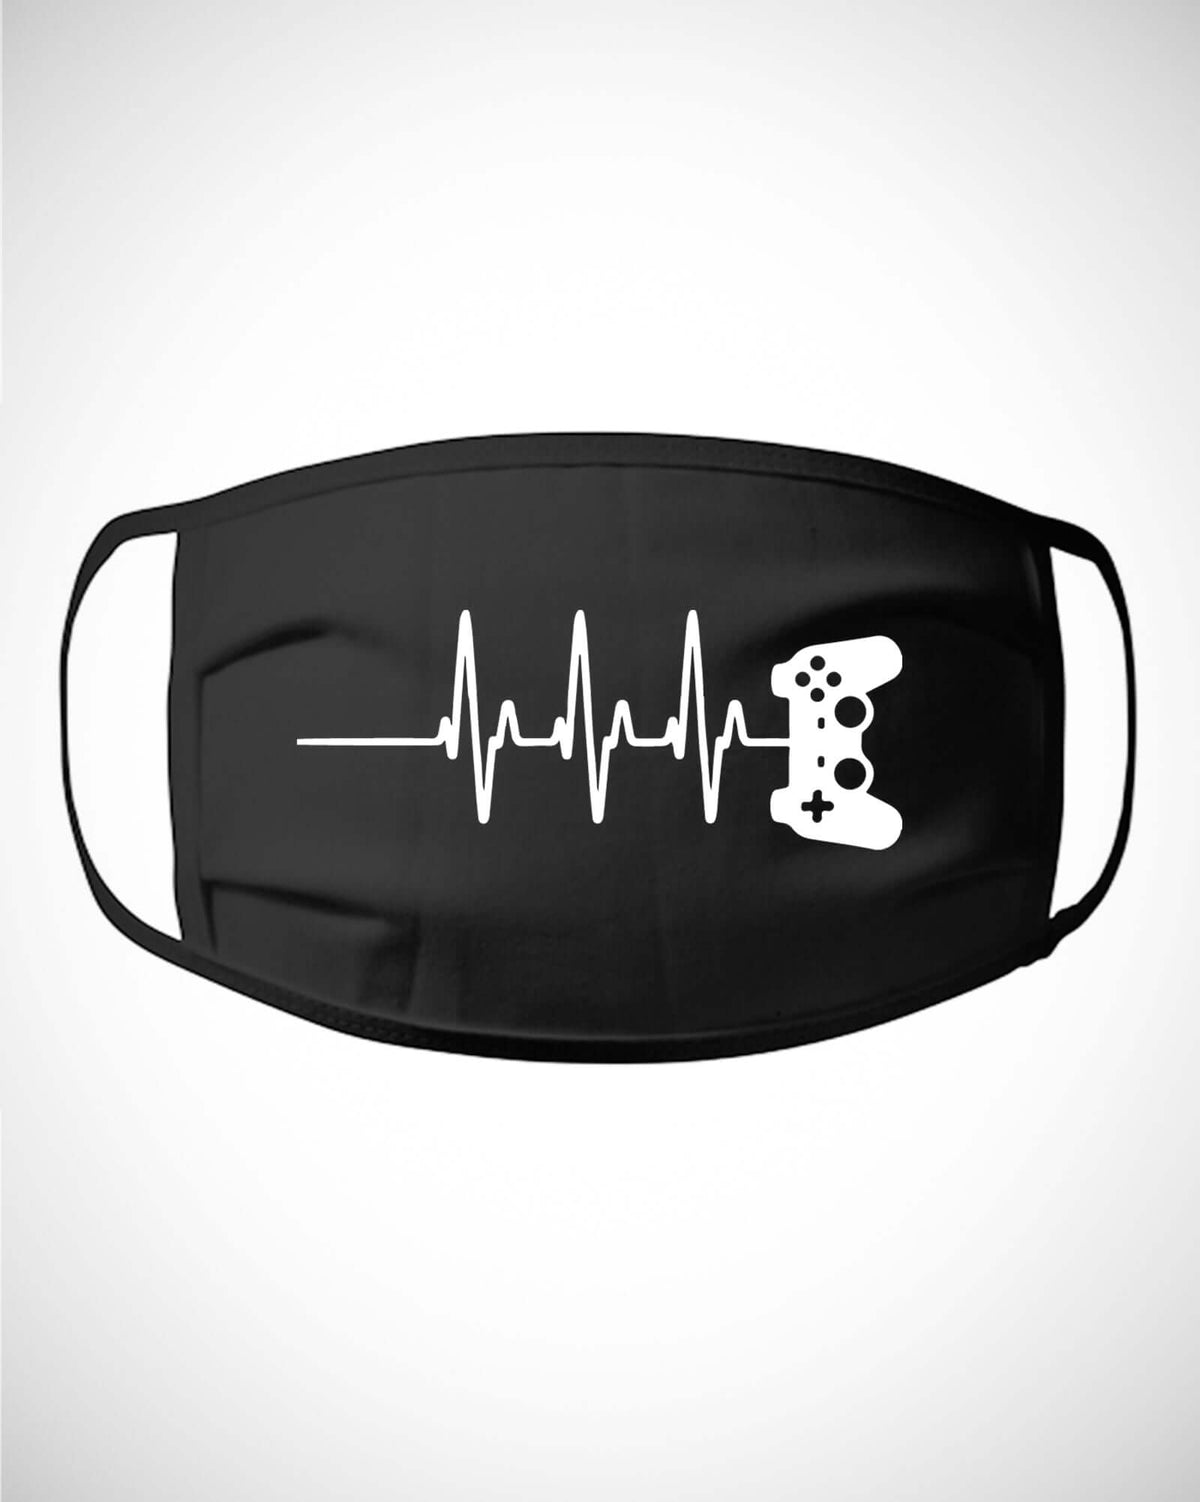 Gamer Heartbeat Video Game Lover Funny Cotton Mask